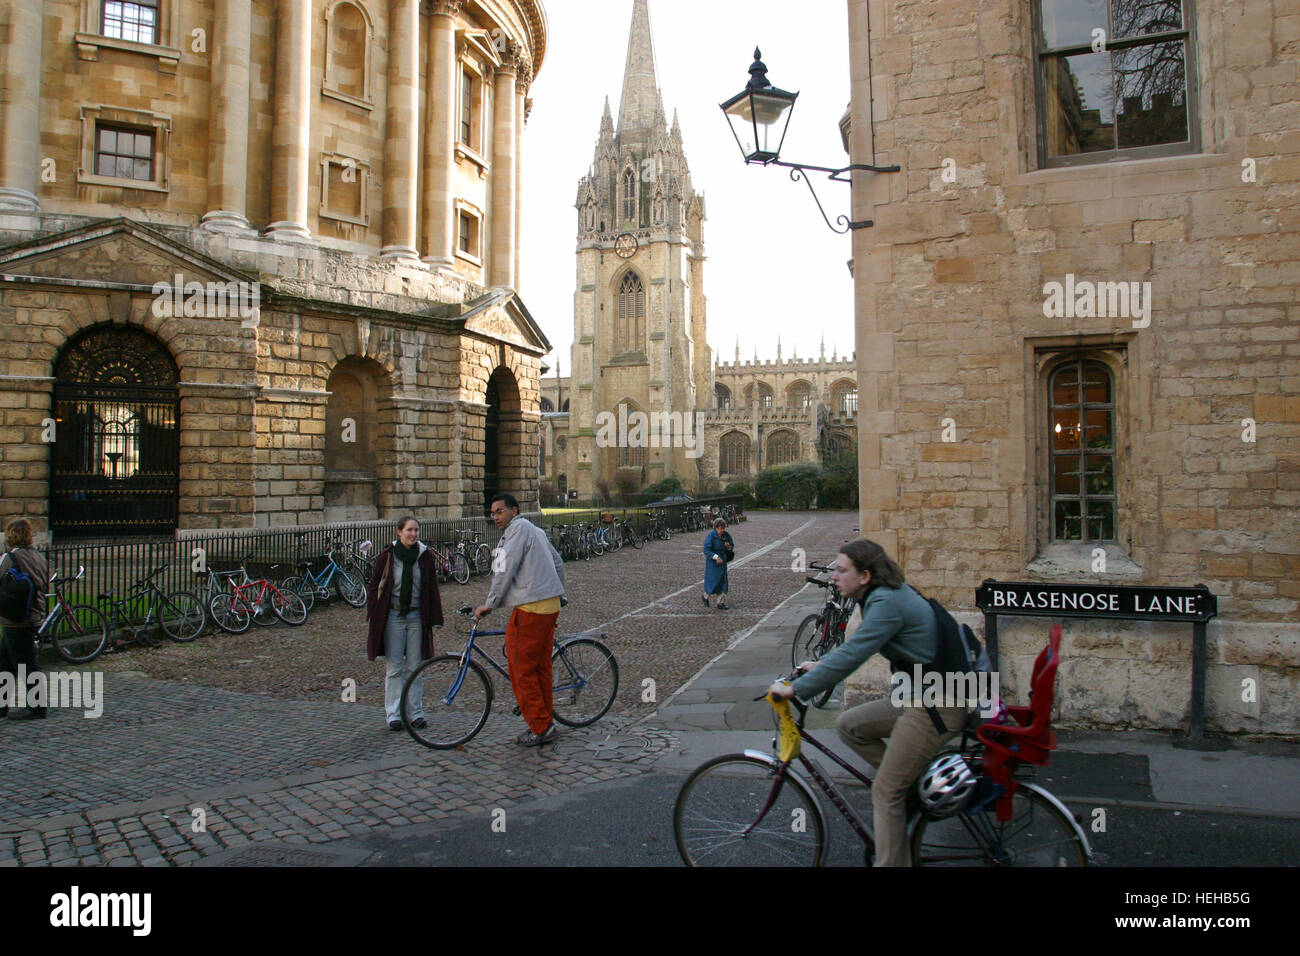 Oxford, England, Most students get around by bicycle or on foot at Oxford. Left is the Radcliffe Camera, centre St. Mary's Chrurch and right Brasenose Lane. Stock Photo